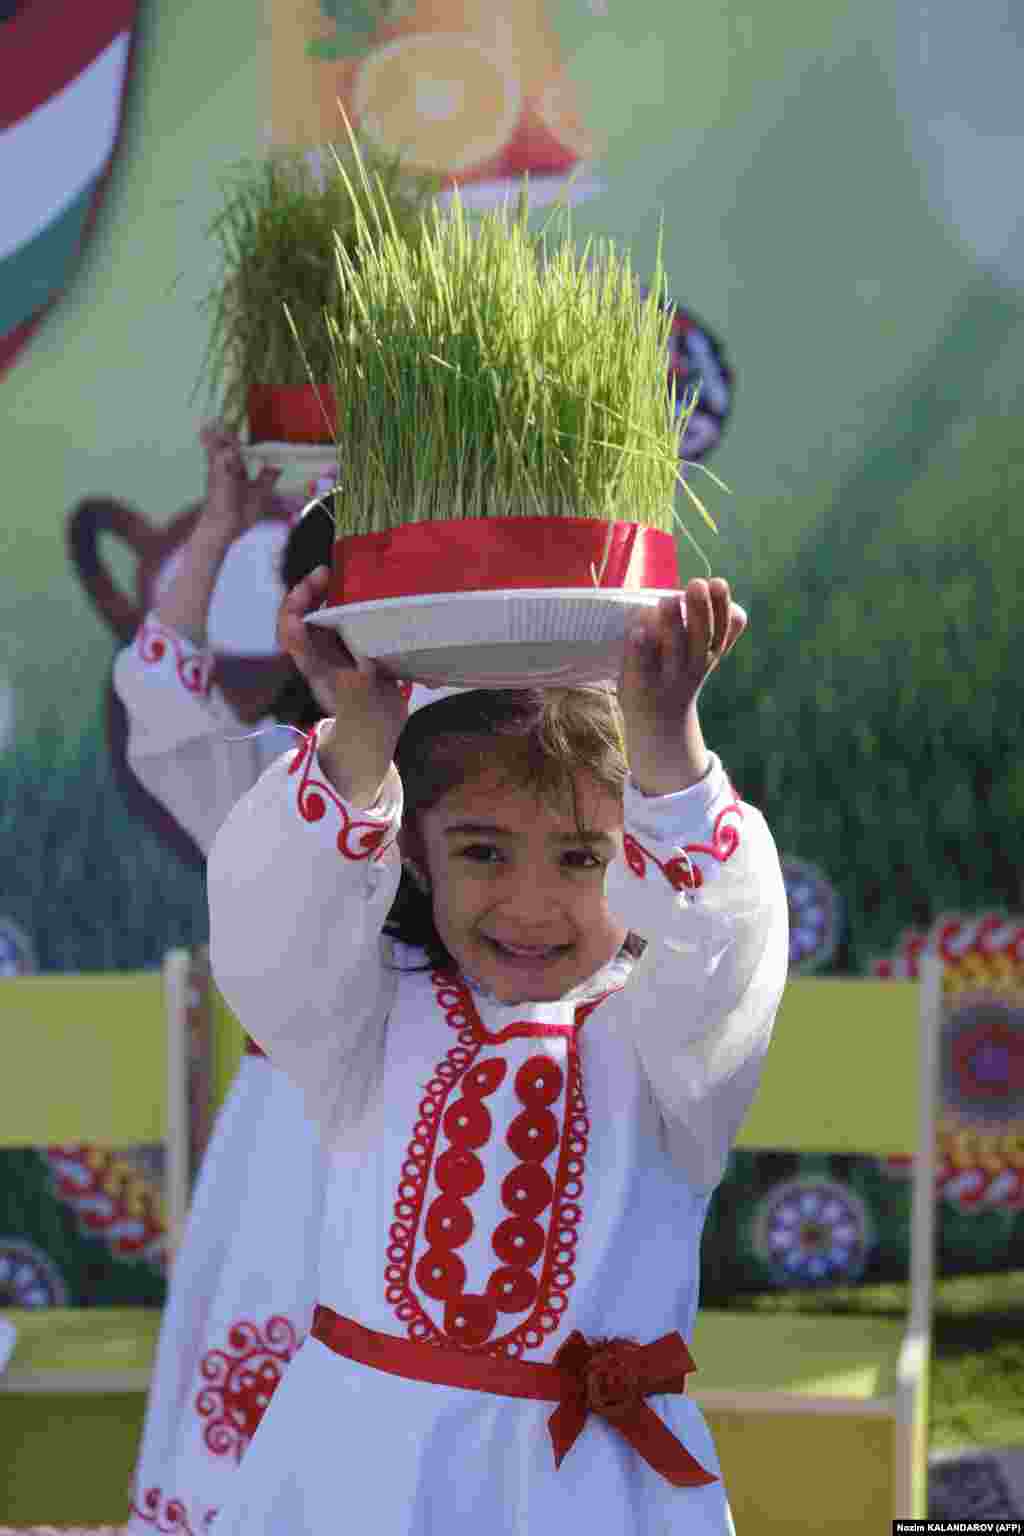 Another Tajik girl in Dushanbe marks the first day of spring.